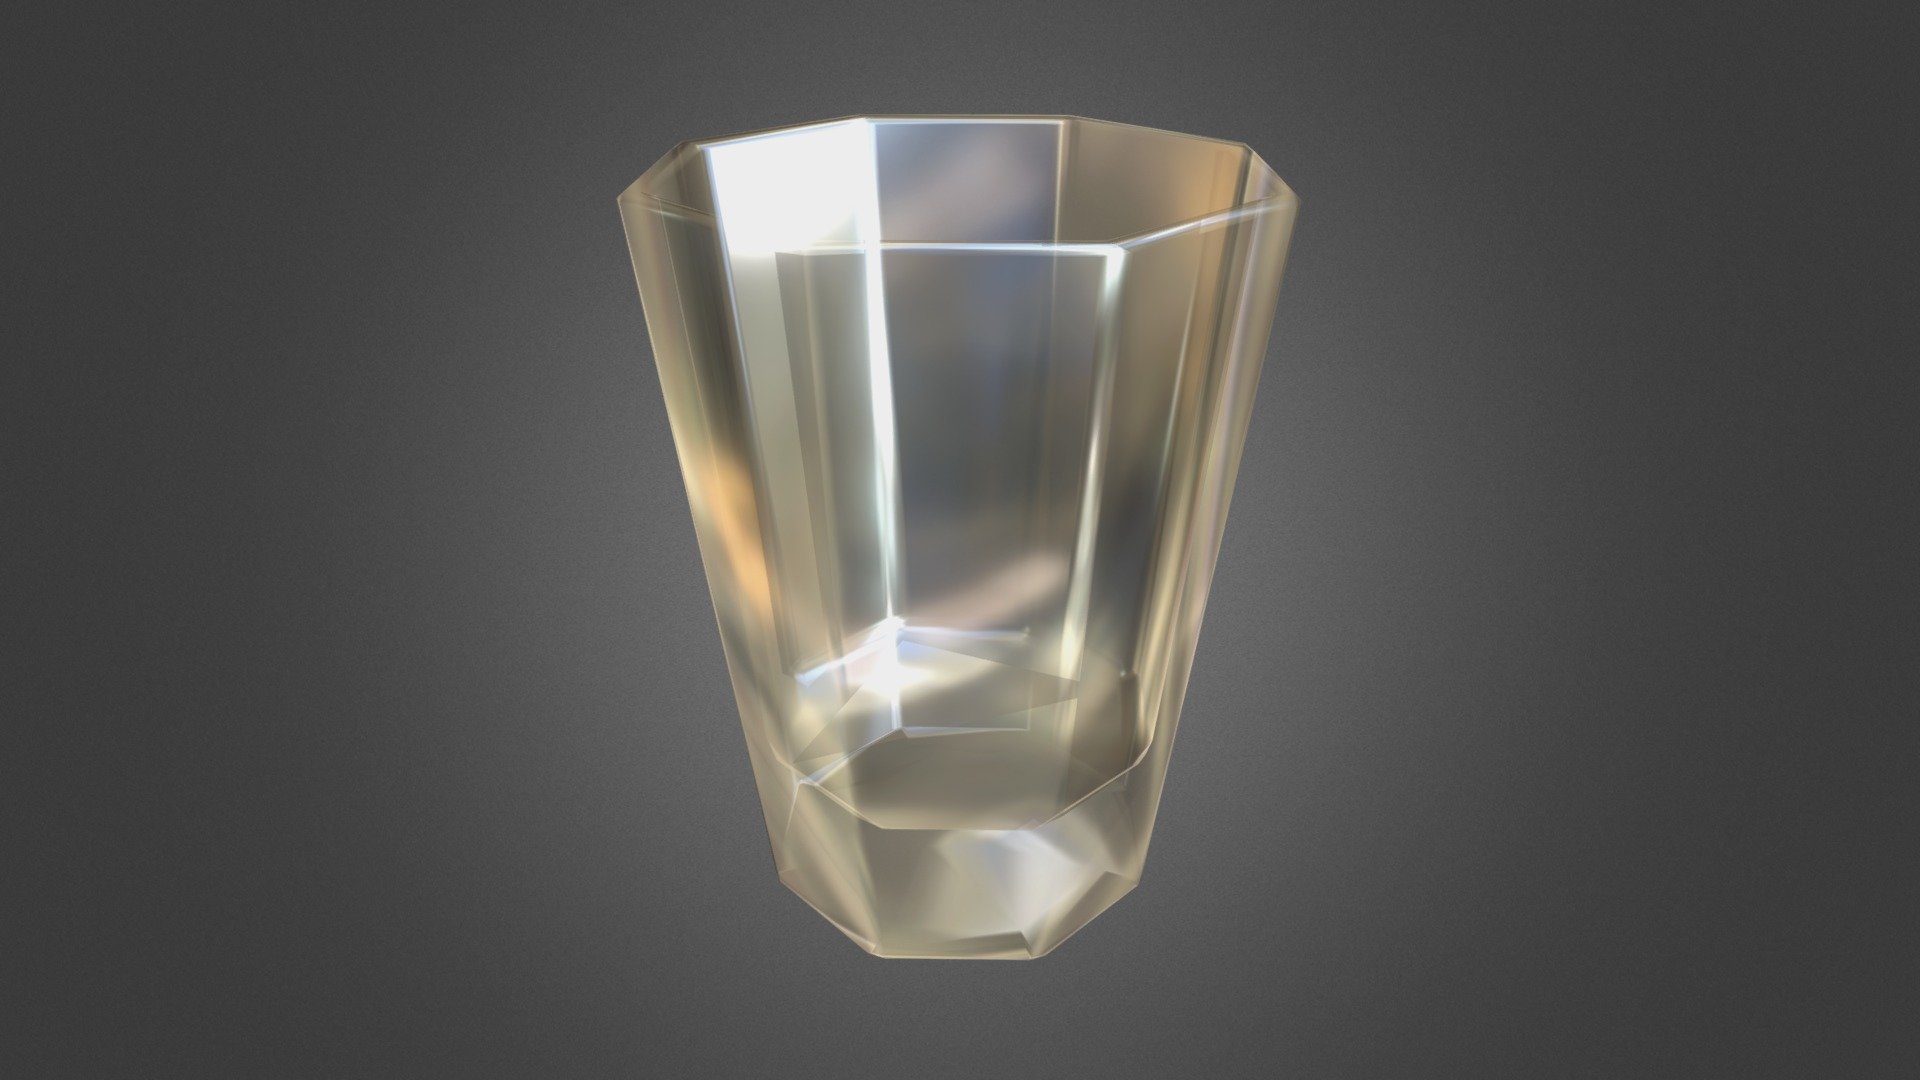 One of my first 3D creations. I learned a lot in this project about various tools and shortcuts, but it all started because I wanted to create a very simple game asset, a little glass; something I think I accomplished pretty well 3d model